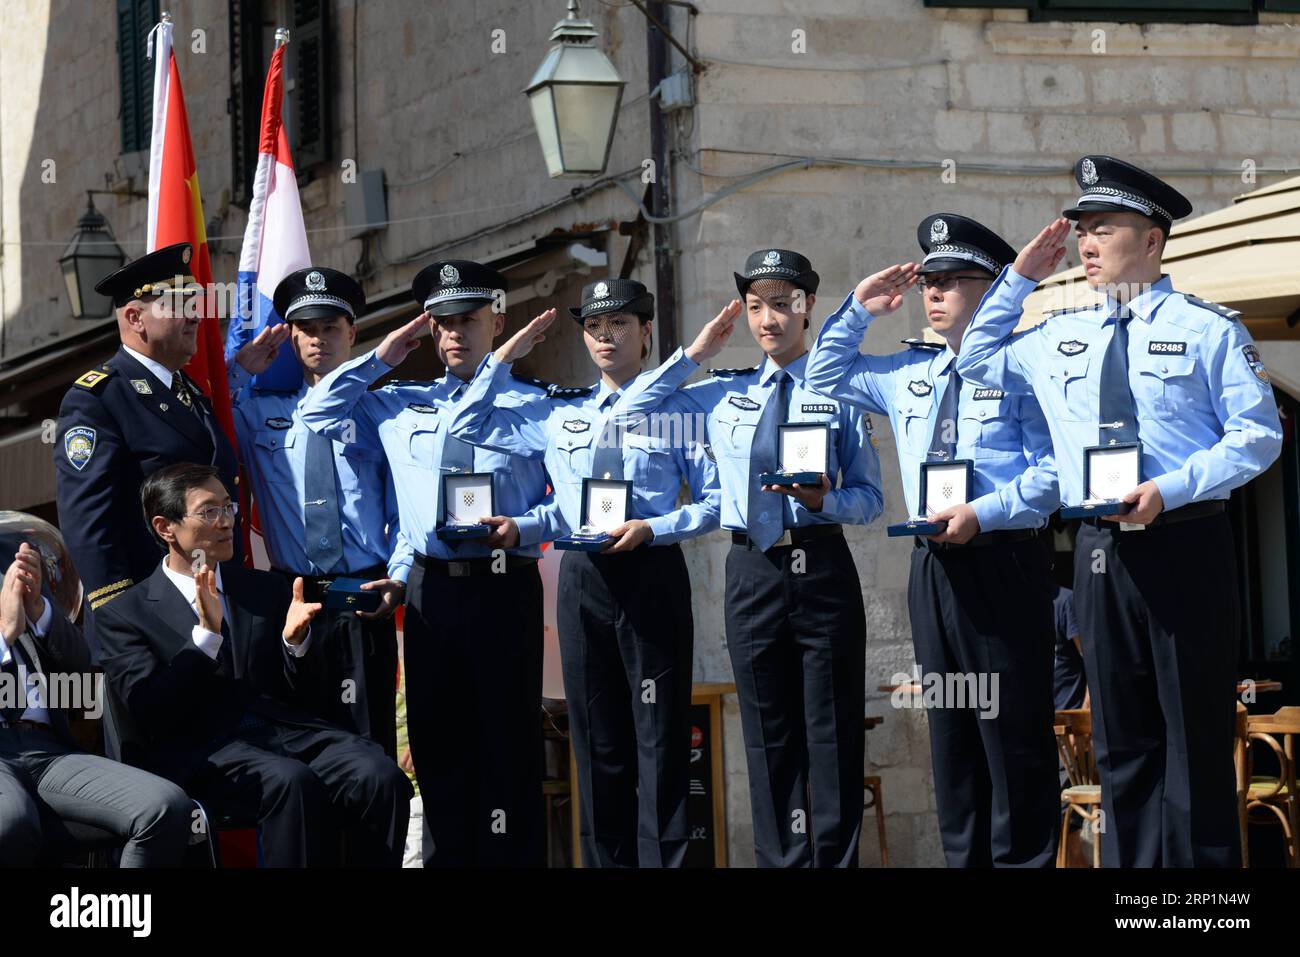 (180715) -- DUBROVNIK, July 15, 2018 -- Zeljko Prsa, Deputy General Police Director of Croatia, gives police badges to Chinese police officers during the launching ceremony of joint police patrol between China and Croatia in Dubrovnik, Croatia, on July 15, 2018. Six uniformed Chinese police officers started joint patrol with their Croatian counterparts here on Sunday. ) (lrz) CROATIA-DUBROVNIK-TOURISM-JOINT POLICE PATROL GaoxLei PUBLICATIONxNOTxINxCHN Stock Photo